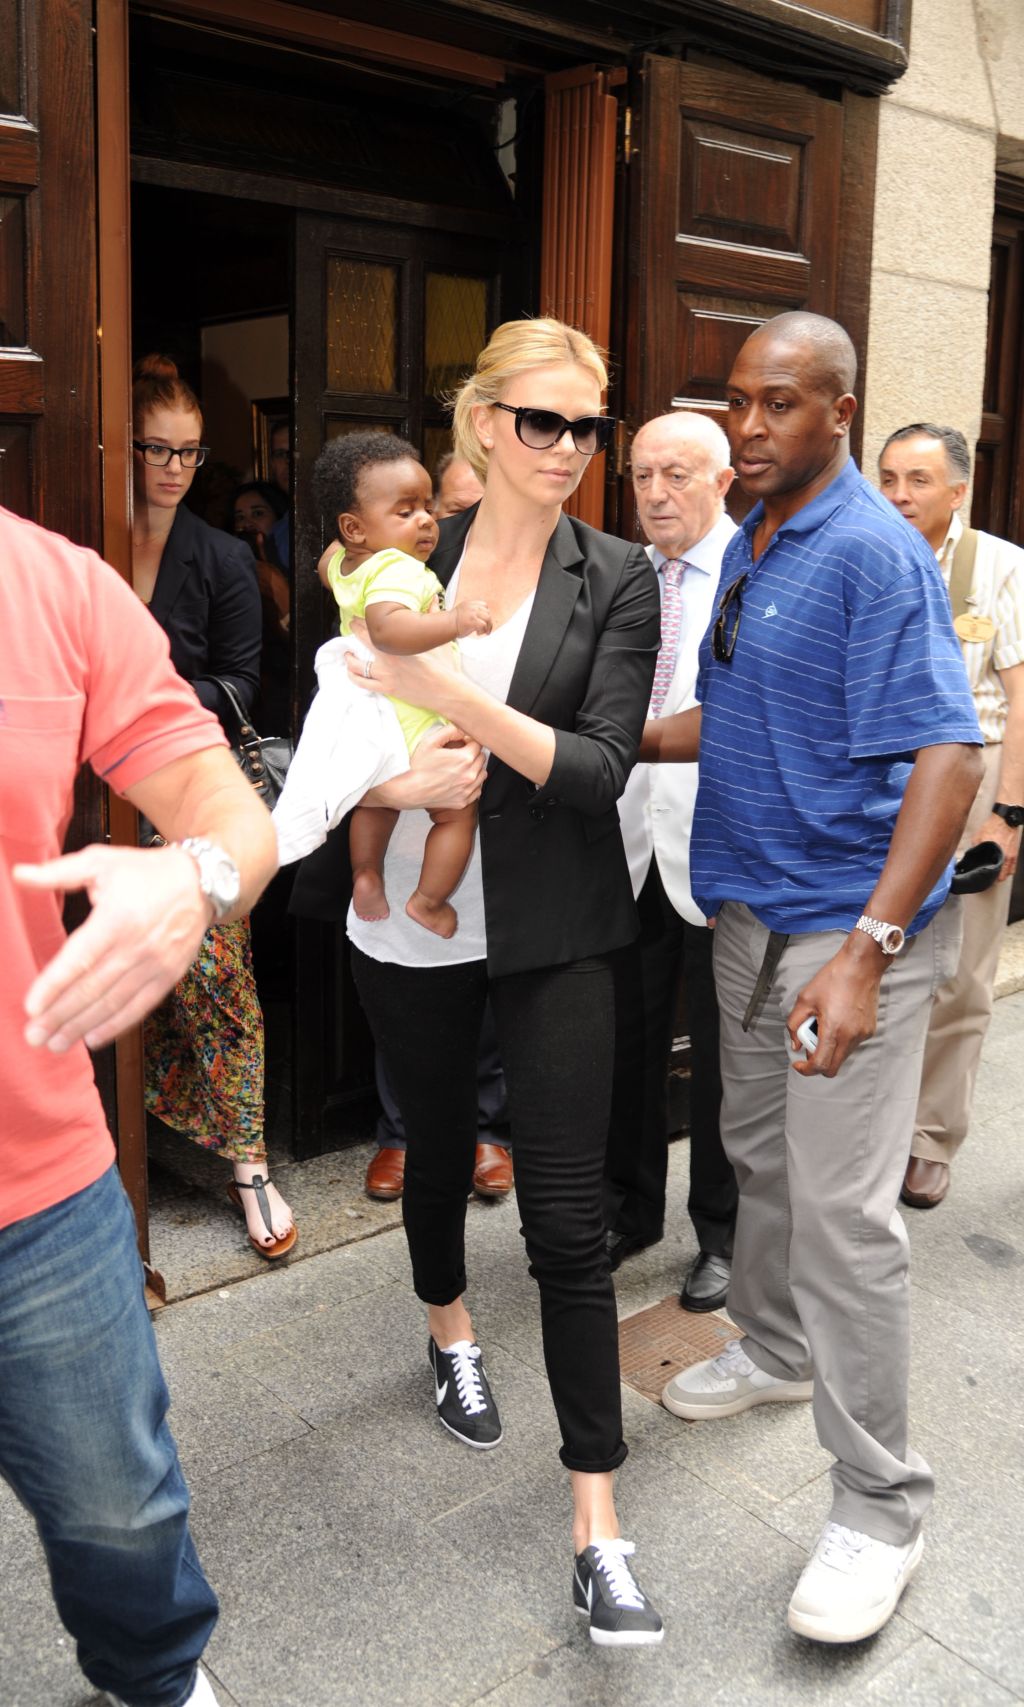 White Celebrities Adopt Black Babies Because No One Else Will?